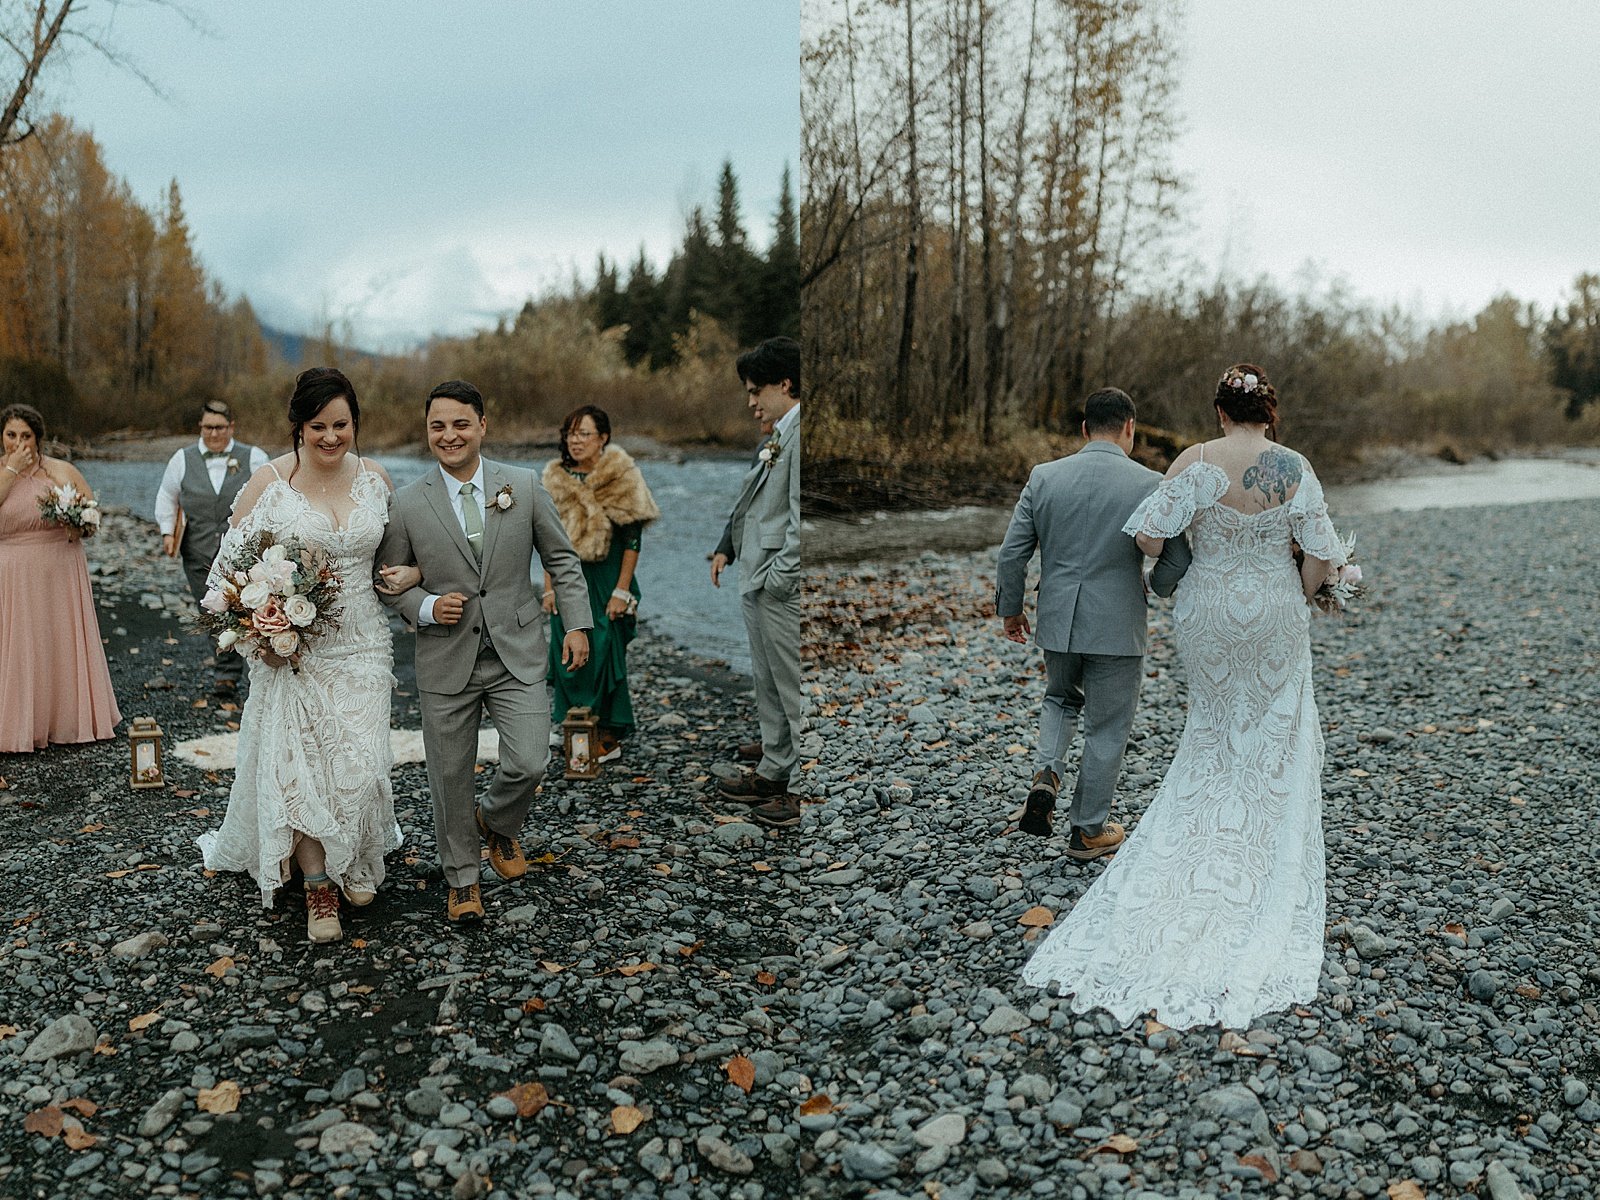  Newlyweds exiting their ceremony after intimate elopement on a river bank in Alaska 